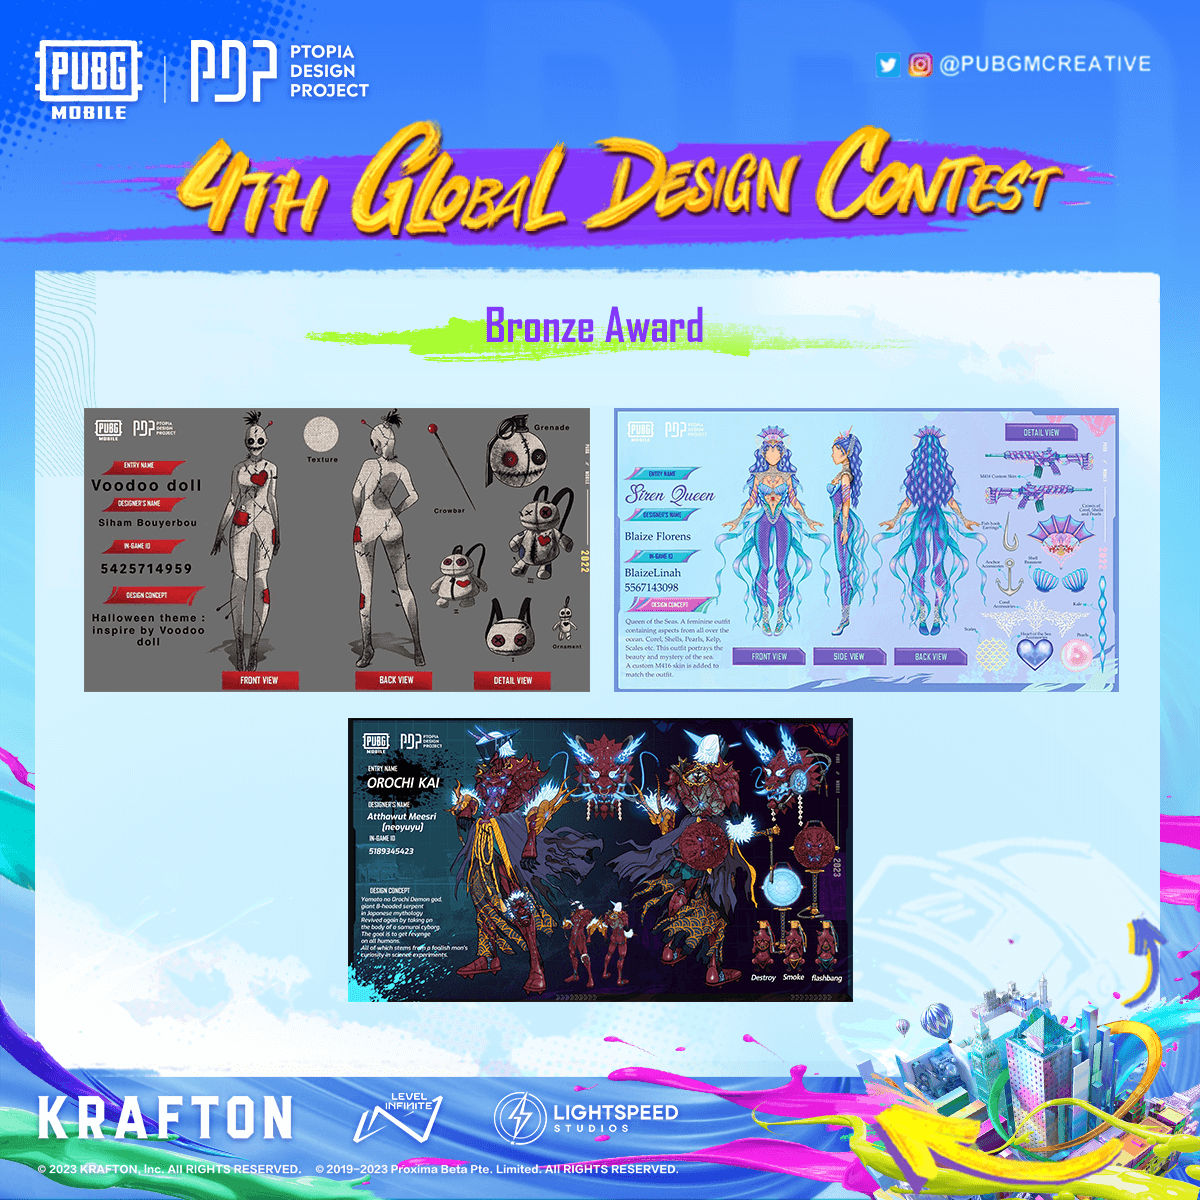 Congratulations to the Bronze, Silver, & Gold recipients for the 4th Global Design Contest! 

Are you a Creative? Make sure to join our Lobby Background Design Contest & Stygian Liege X-suit Fan Art Contest. 

#PUBGMOBILE #PUBGMPDP #PUBGMCREATIVE #PUBGMFANART #PDPDESIGNAWARDS